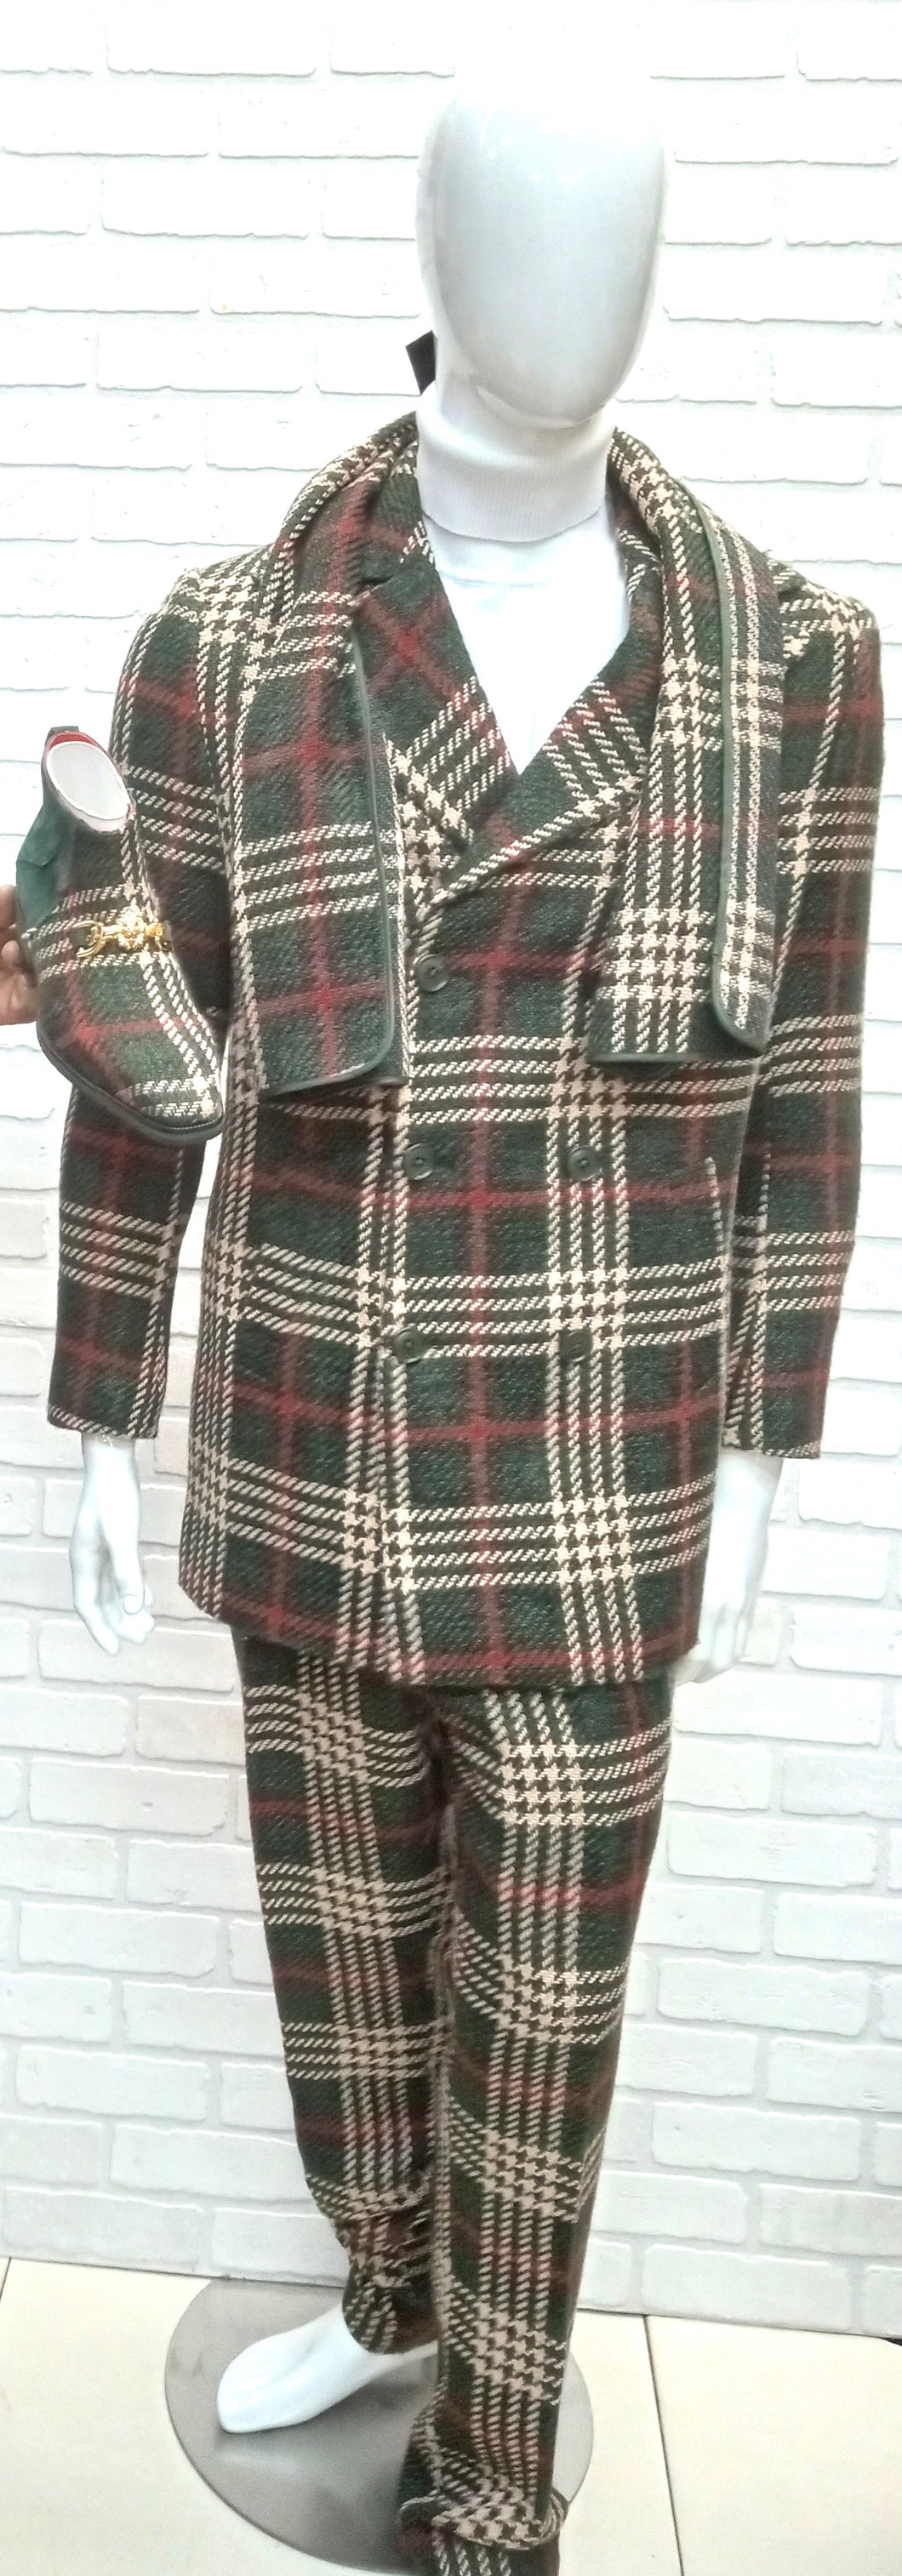 DESIGNER DBL BREASTED PEACOAT SUIT WITH SCARF